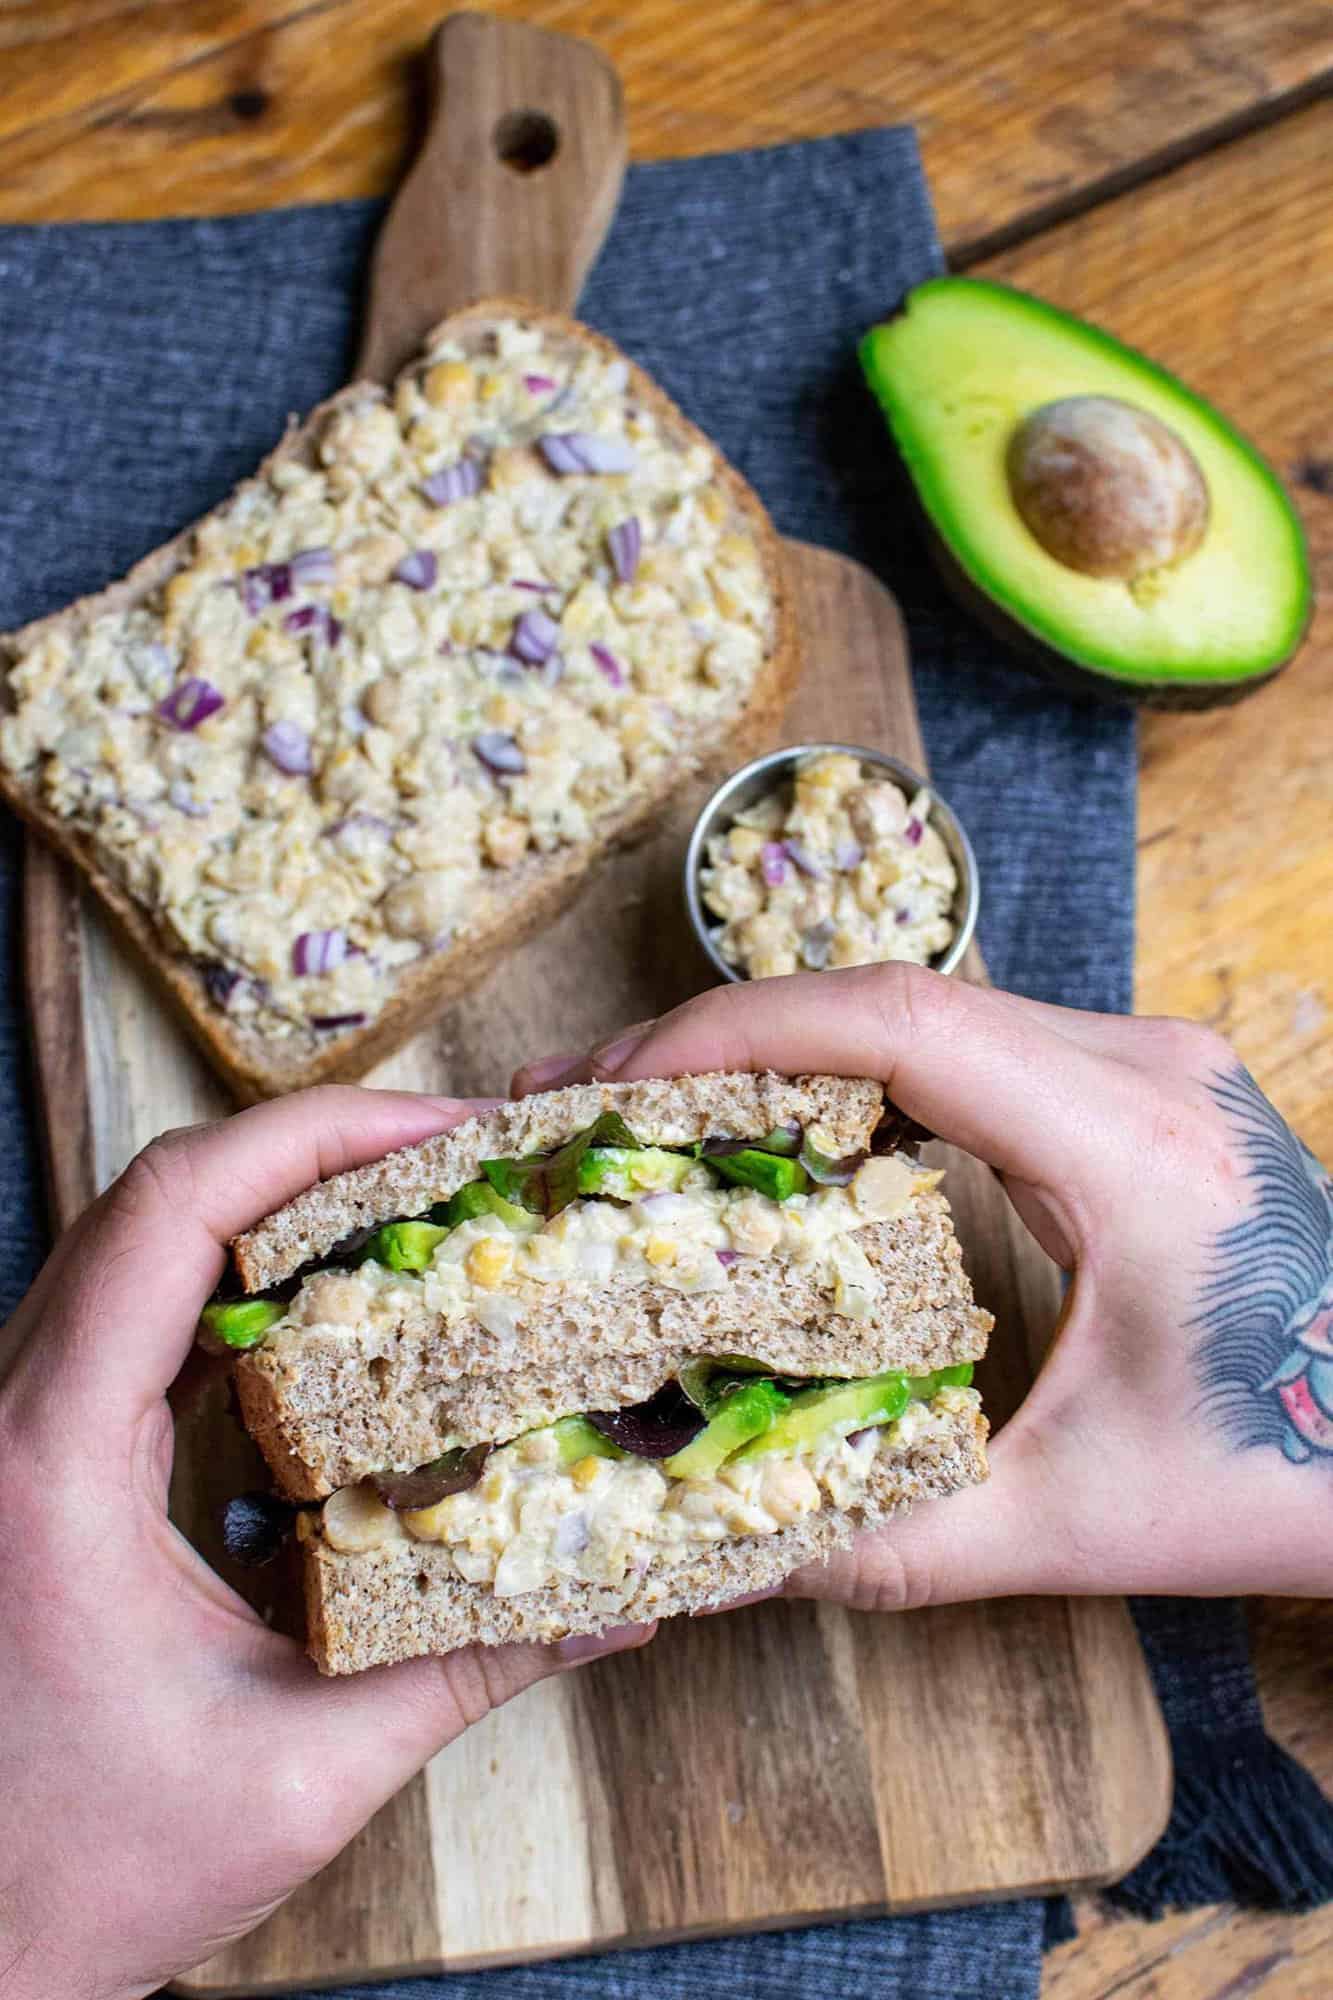 Vegan tuna sandwich being held up by a pair of hands on a chopping board.